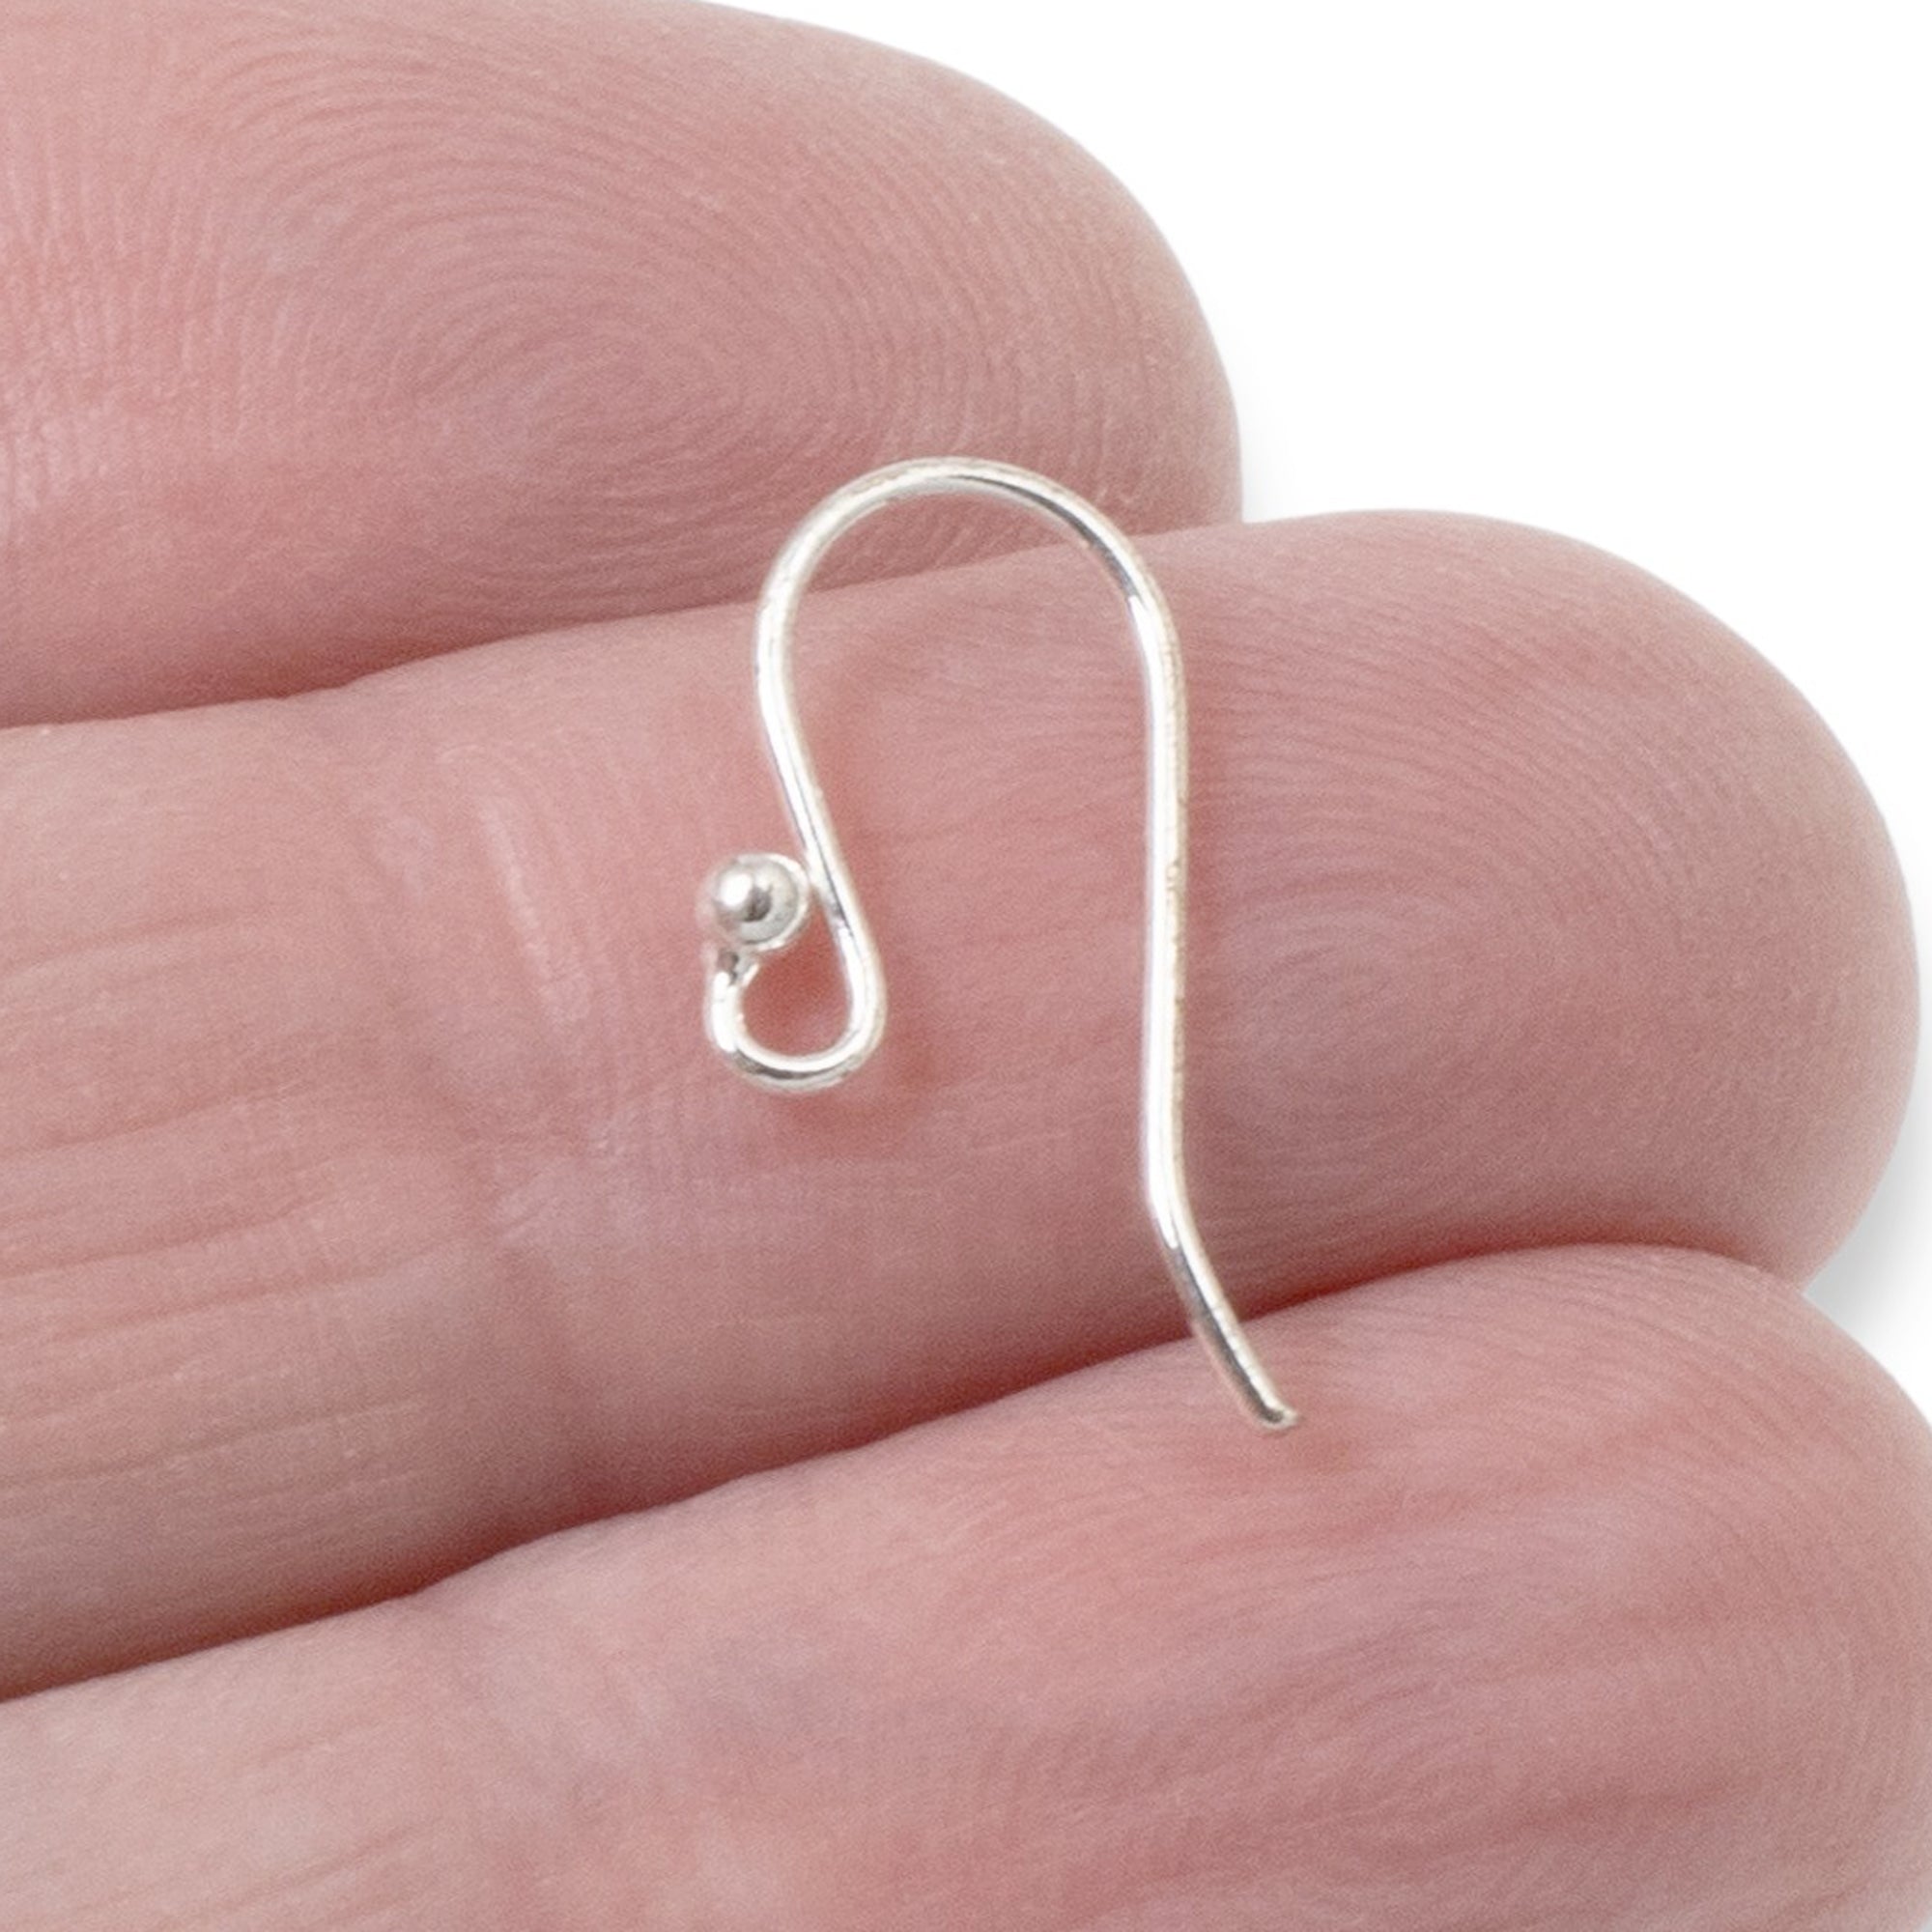 2 Qty. Sterling Silver Earwires with Ball and Coil, Fish Hooks Earwires